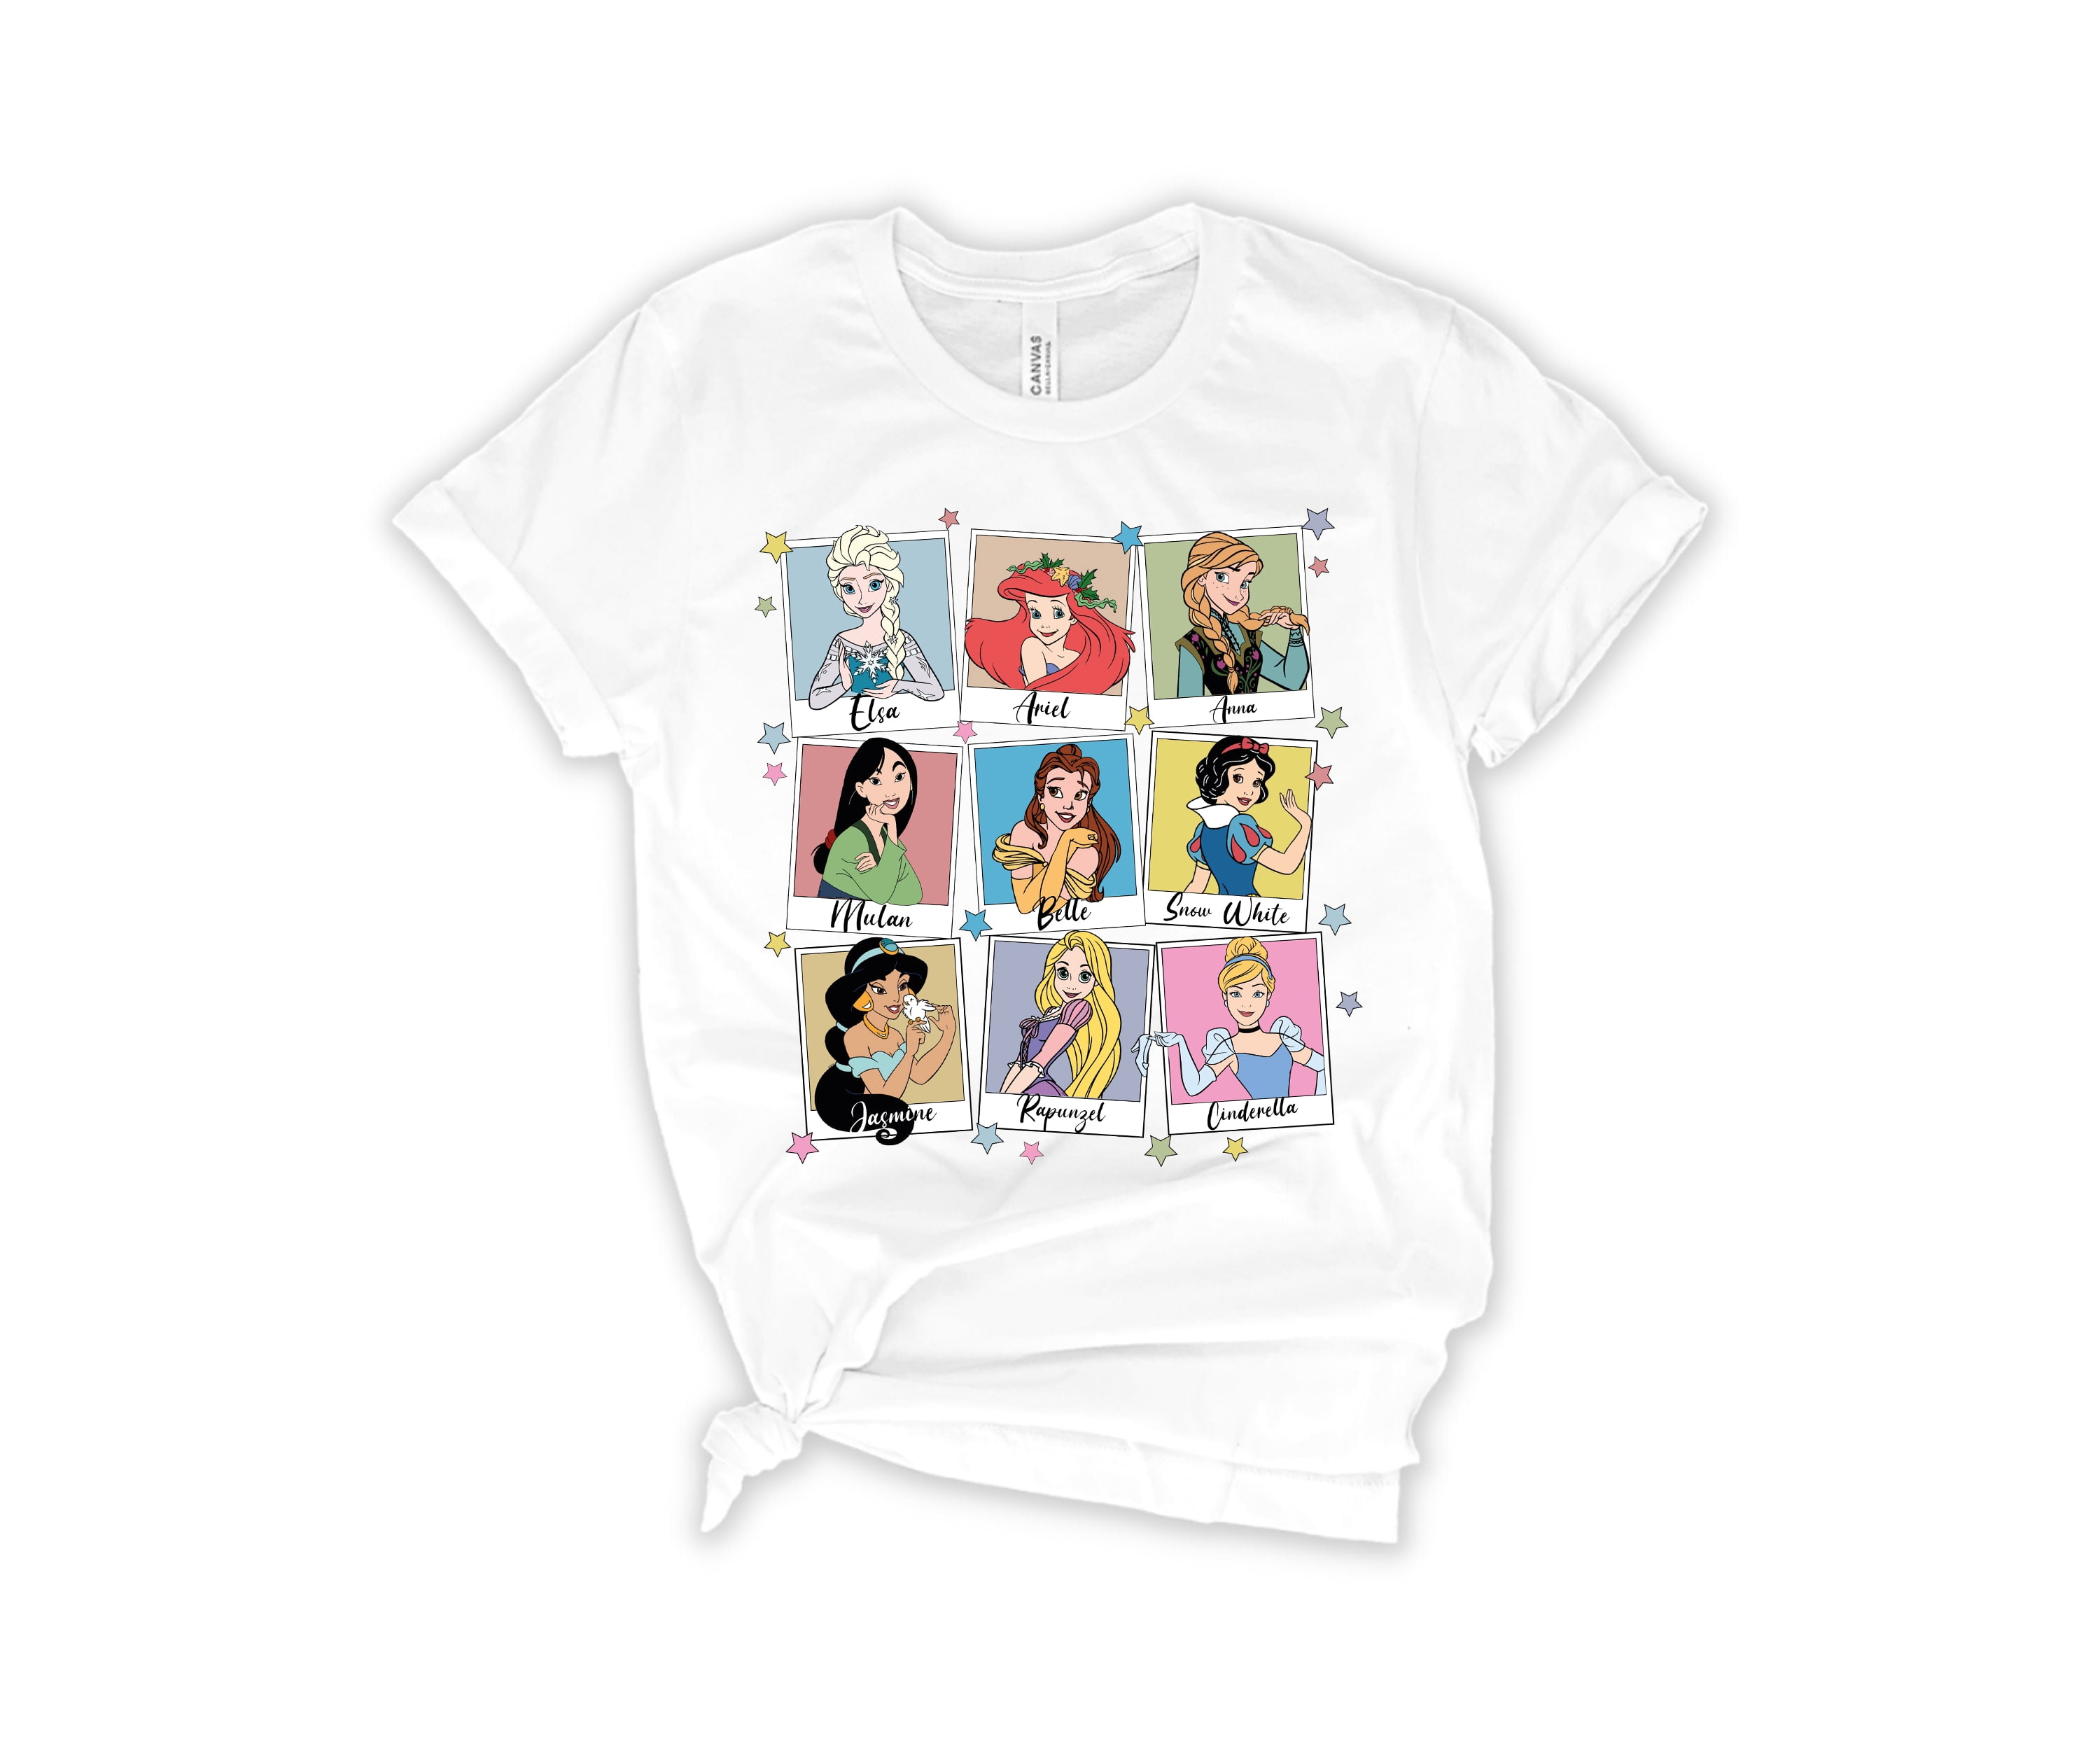 Short of The Disney - Little T- Dreams - Sleeve Ocean Mermaid Shirt Heather Customized-Athletic for Ariel Cotton An Adults